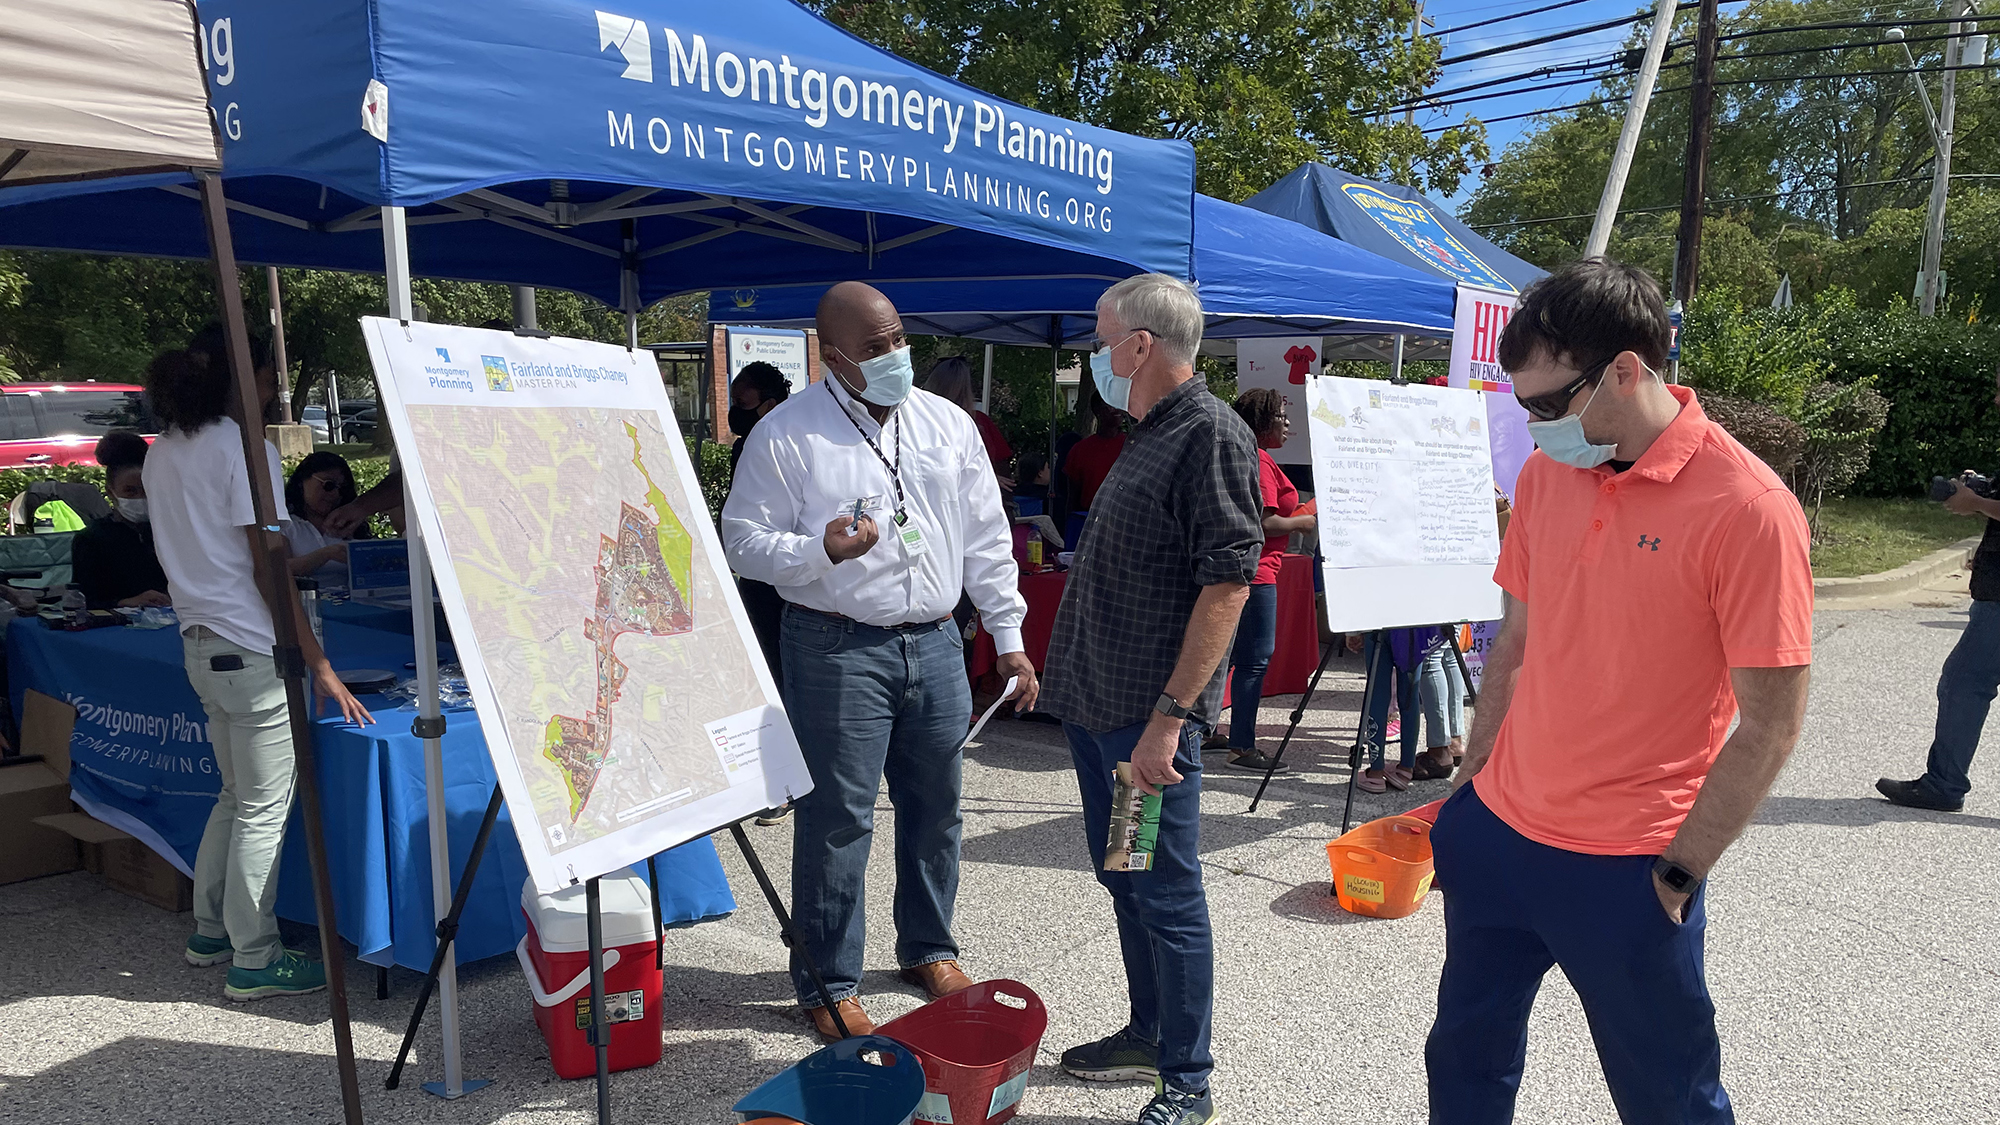 Staff speaks with community members standing by a map in front of a Montgomery Planning blue tent